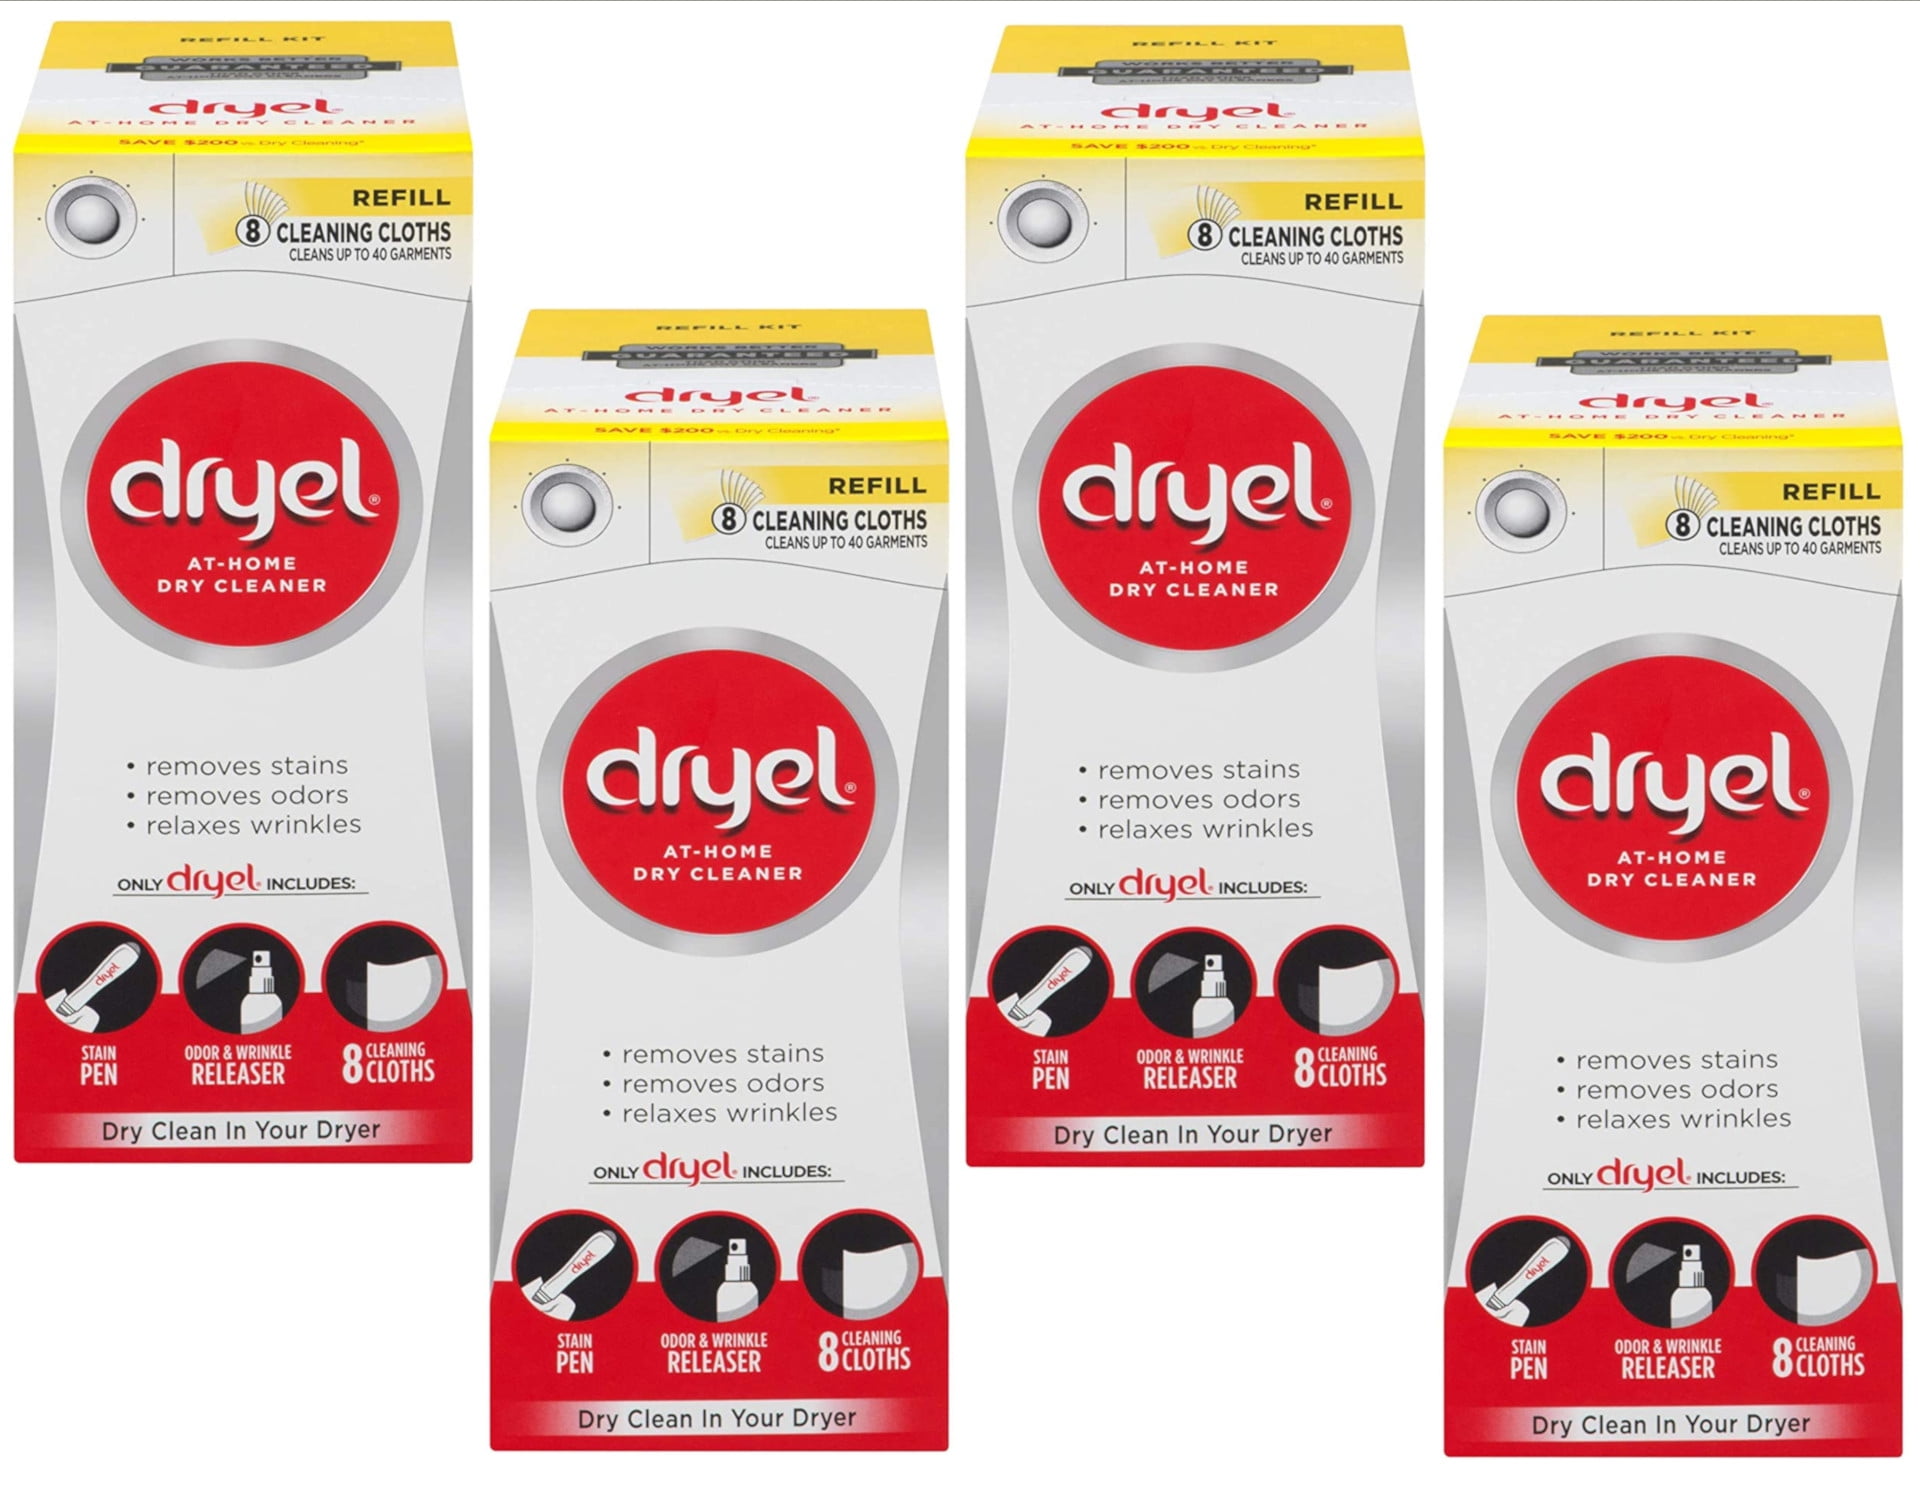 Dryel Home Dry Cleaning Refill Laundry Supplies, 8 ct - Kroger